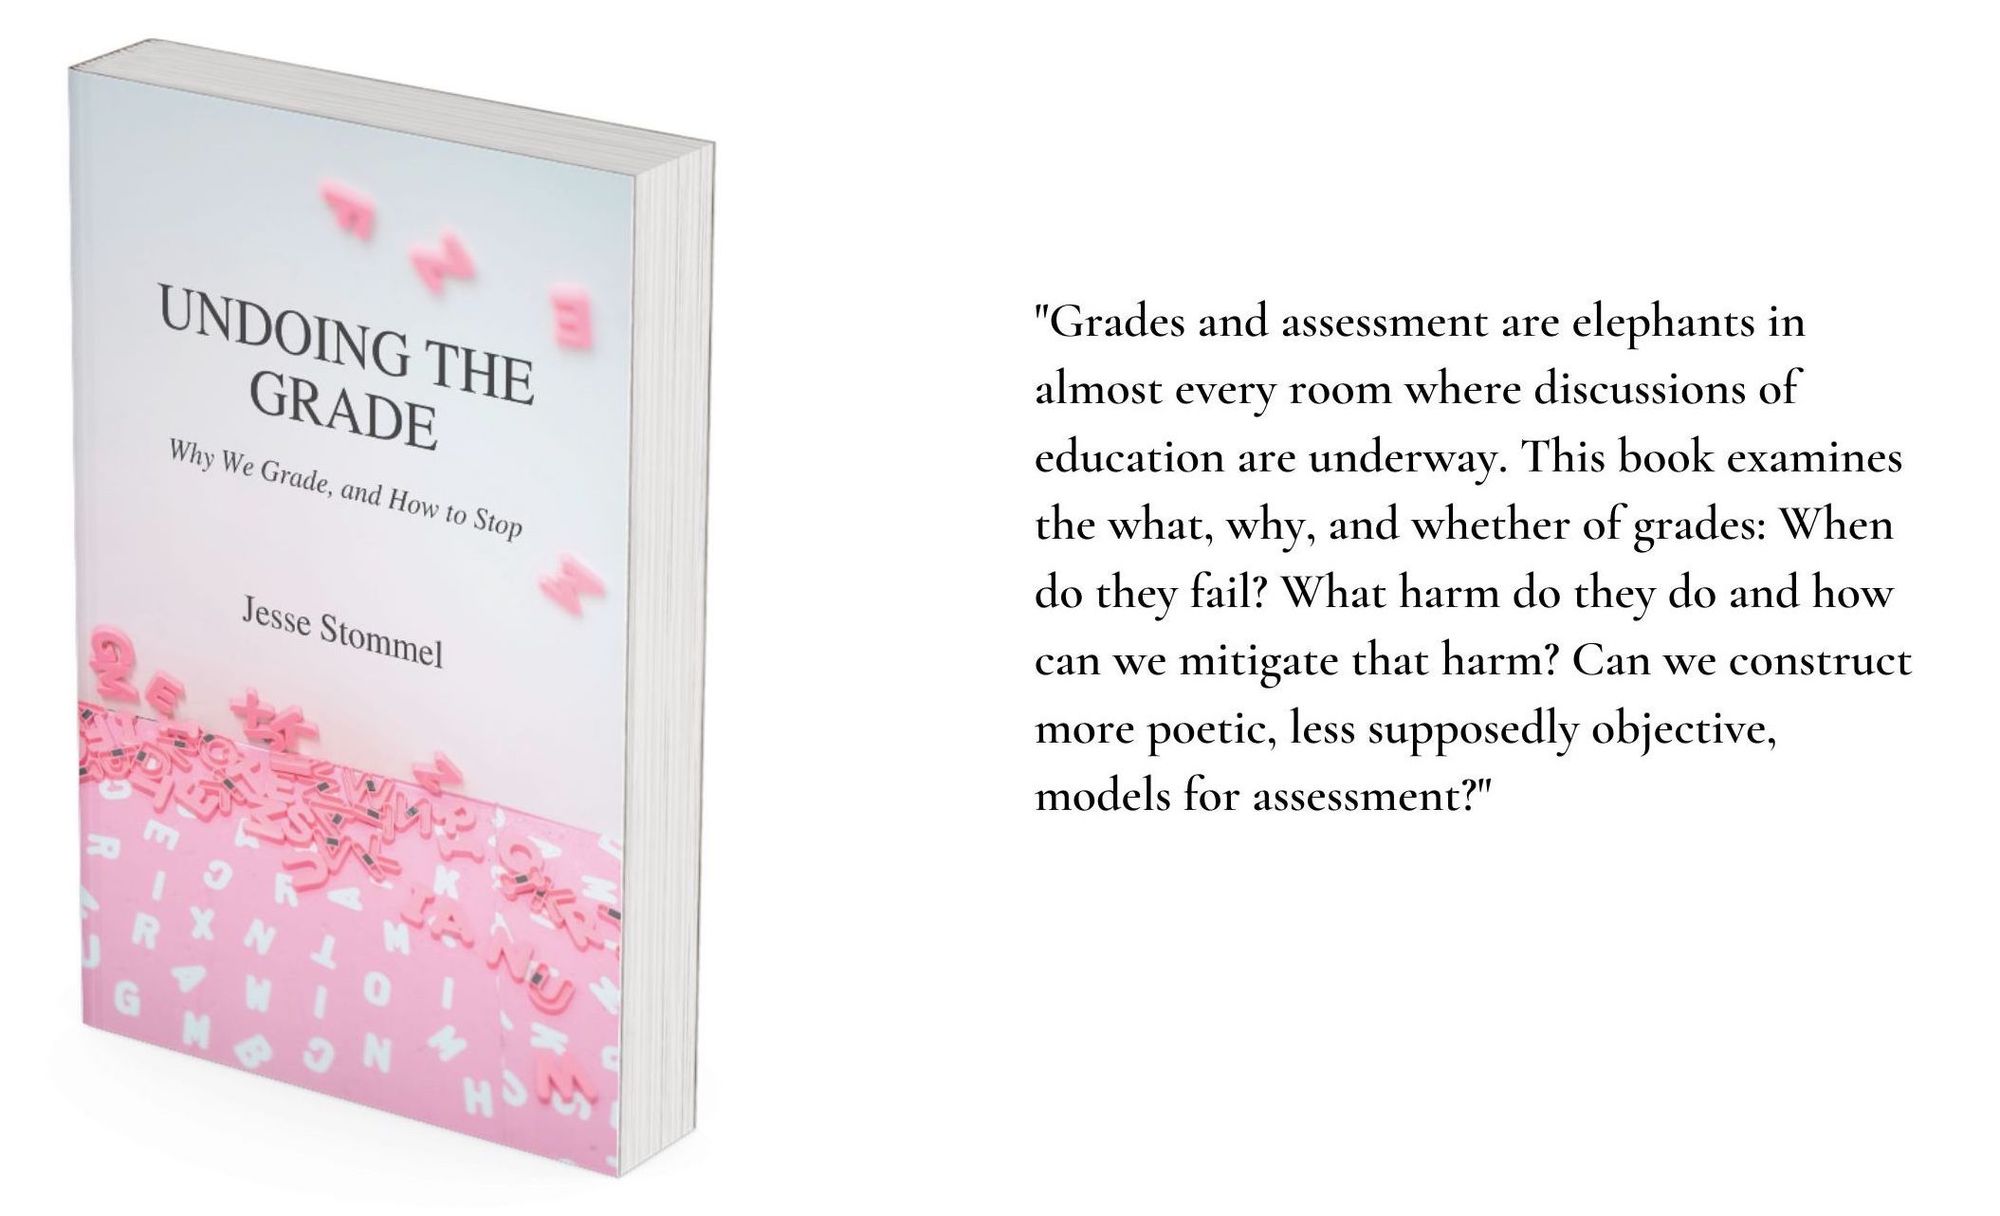 An image of the book cover for Undoing the Grade on the left with a quote from the book on the right: "Grades and assessment are elephants in almost every room where discussions of education are underway. This book examines the what, why, and whether of grades: When do they fail? What harm do they do and how can we mitigate that harm? Can we construct more poetic, less supposedly objective, models for assessment?"